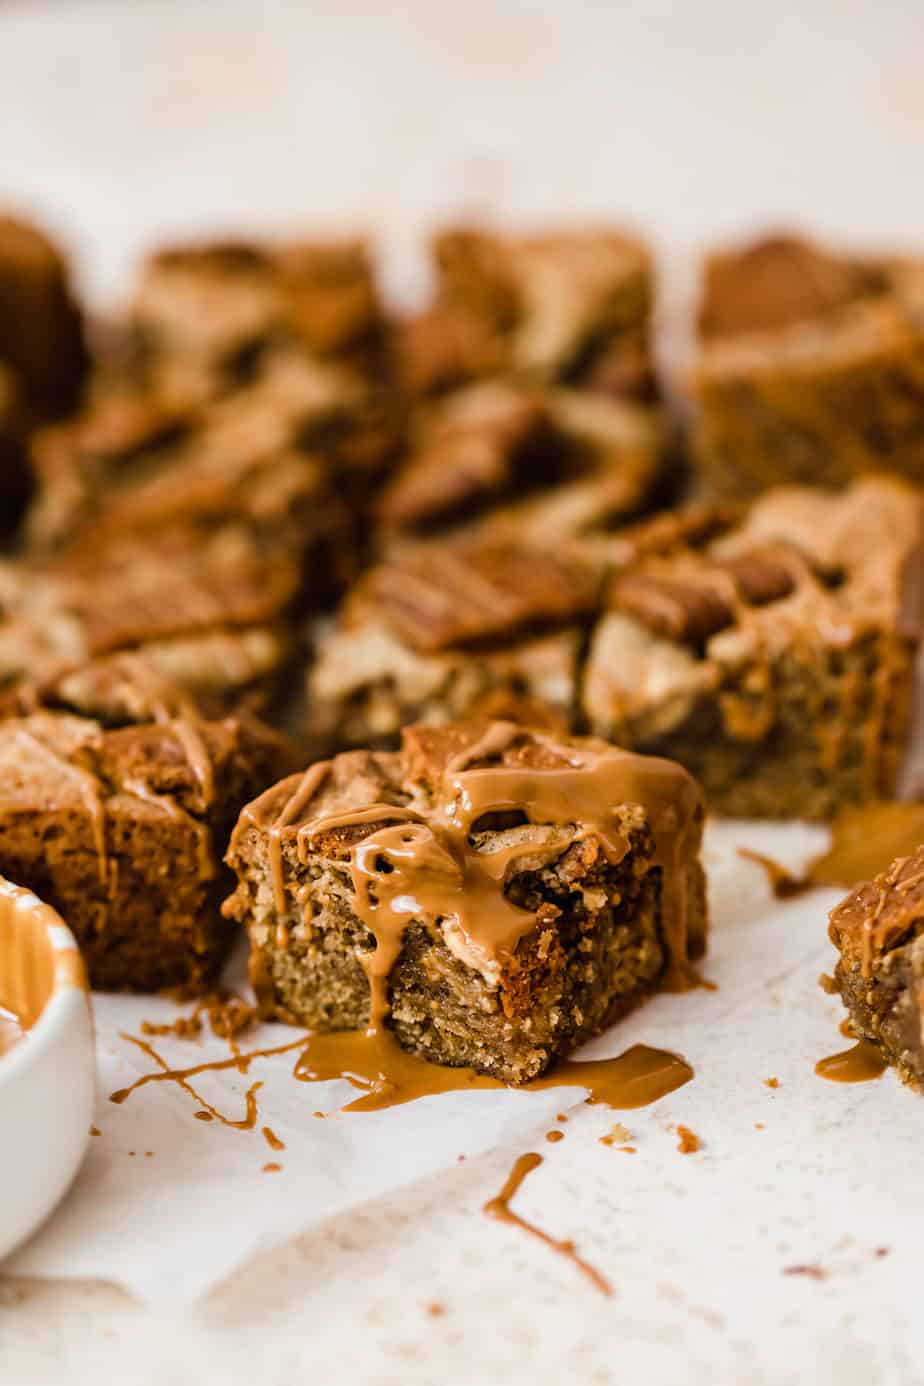 Biscoff Blondie with white chocolate and a drizzle of caramel sauce.